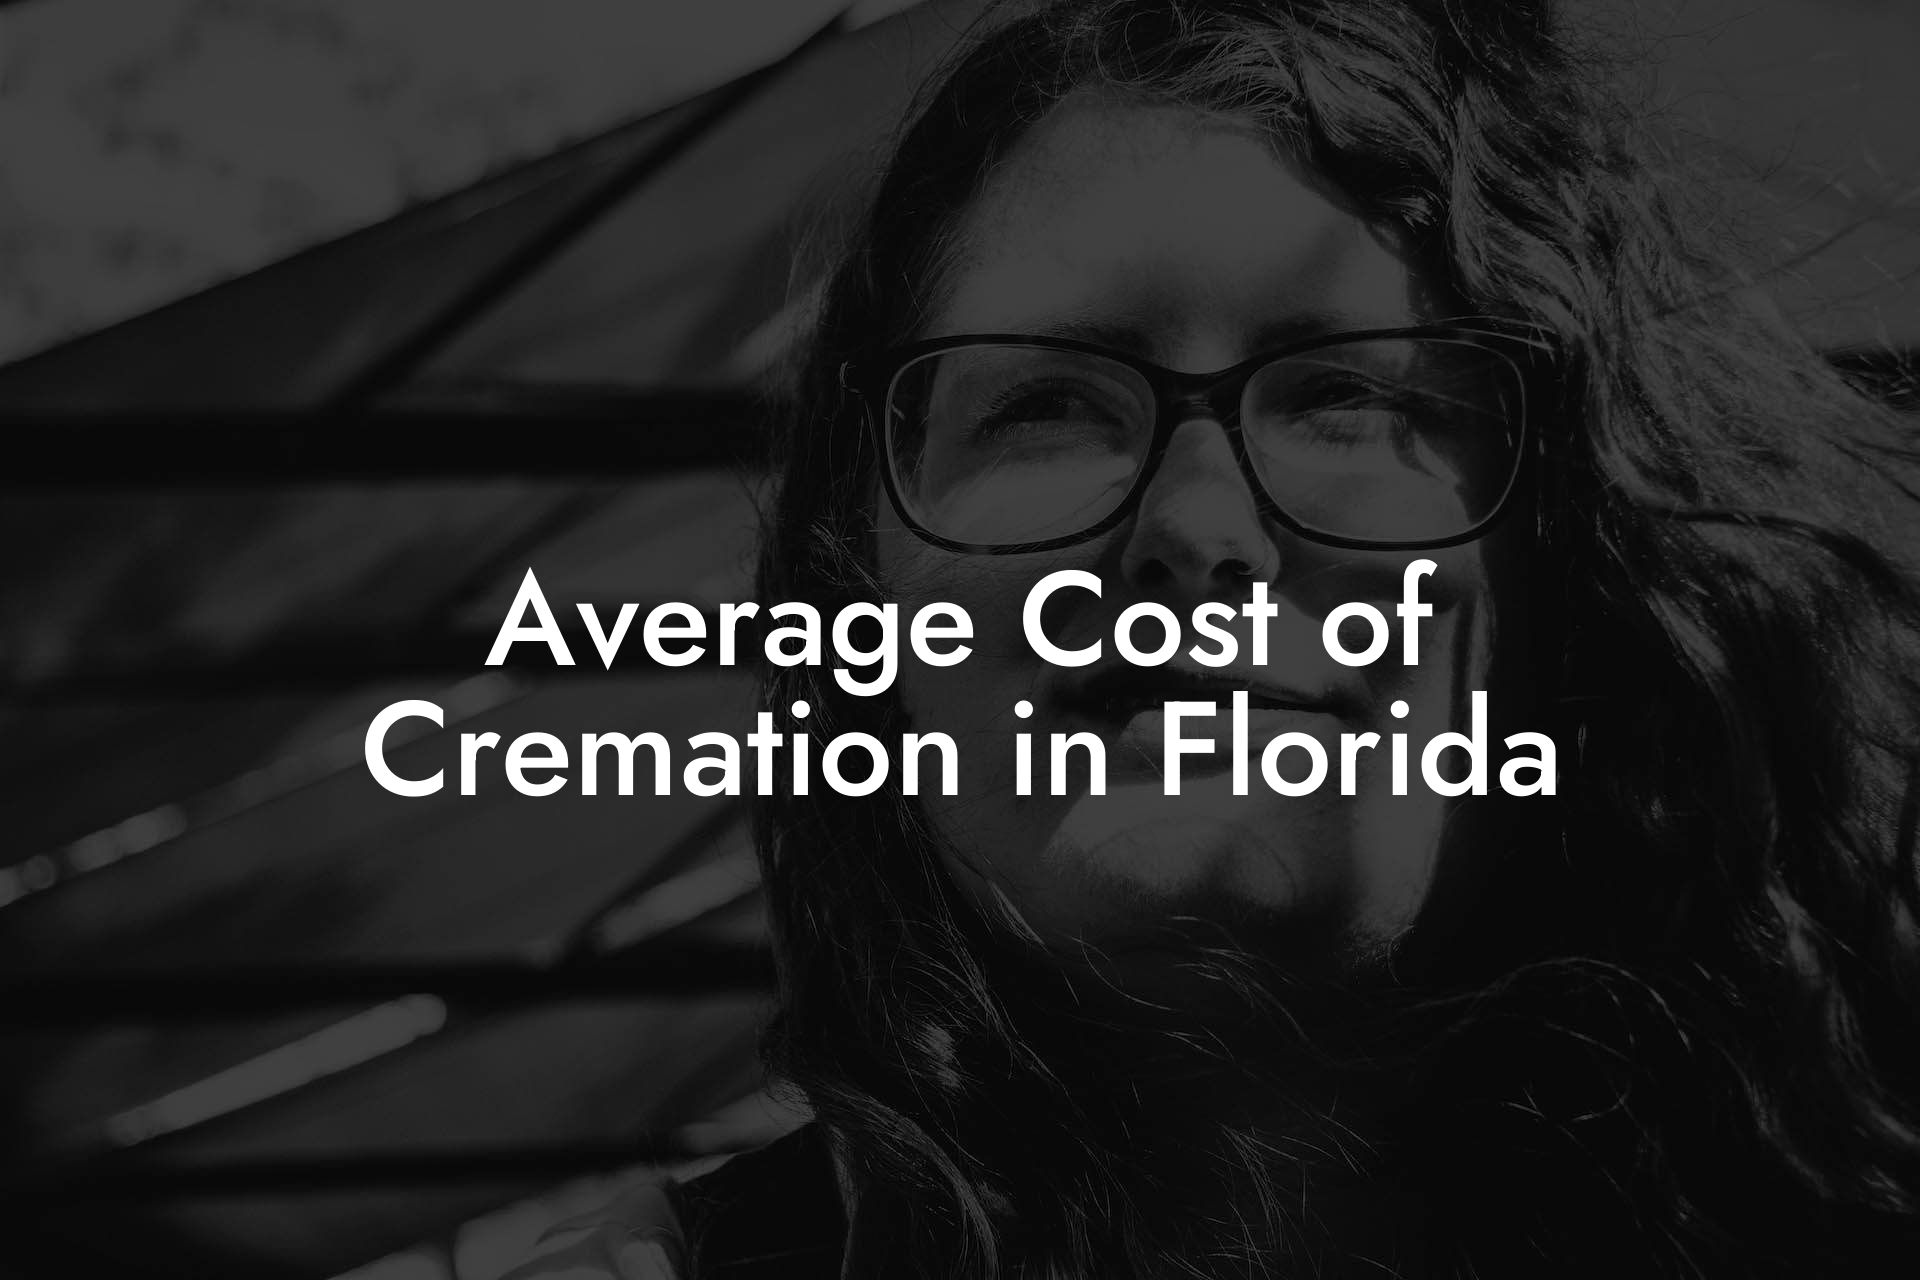 Average Cost of Cremation in Florida